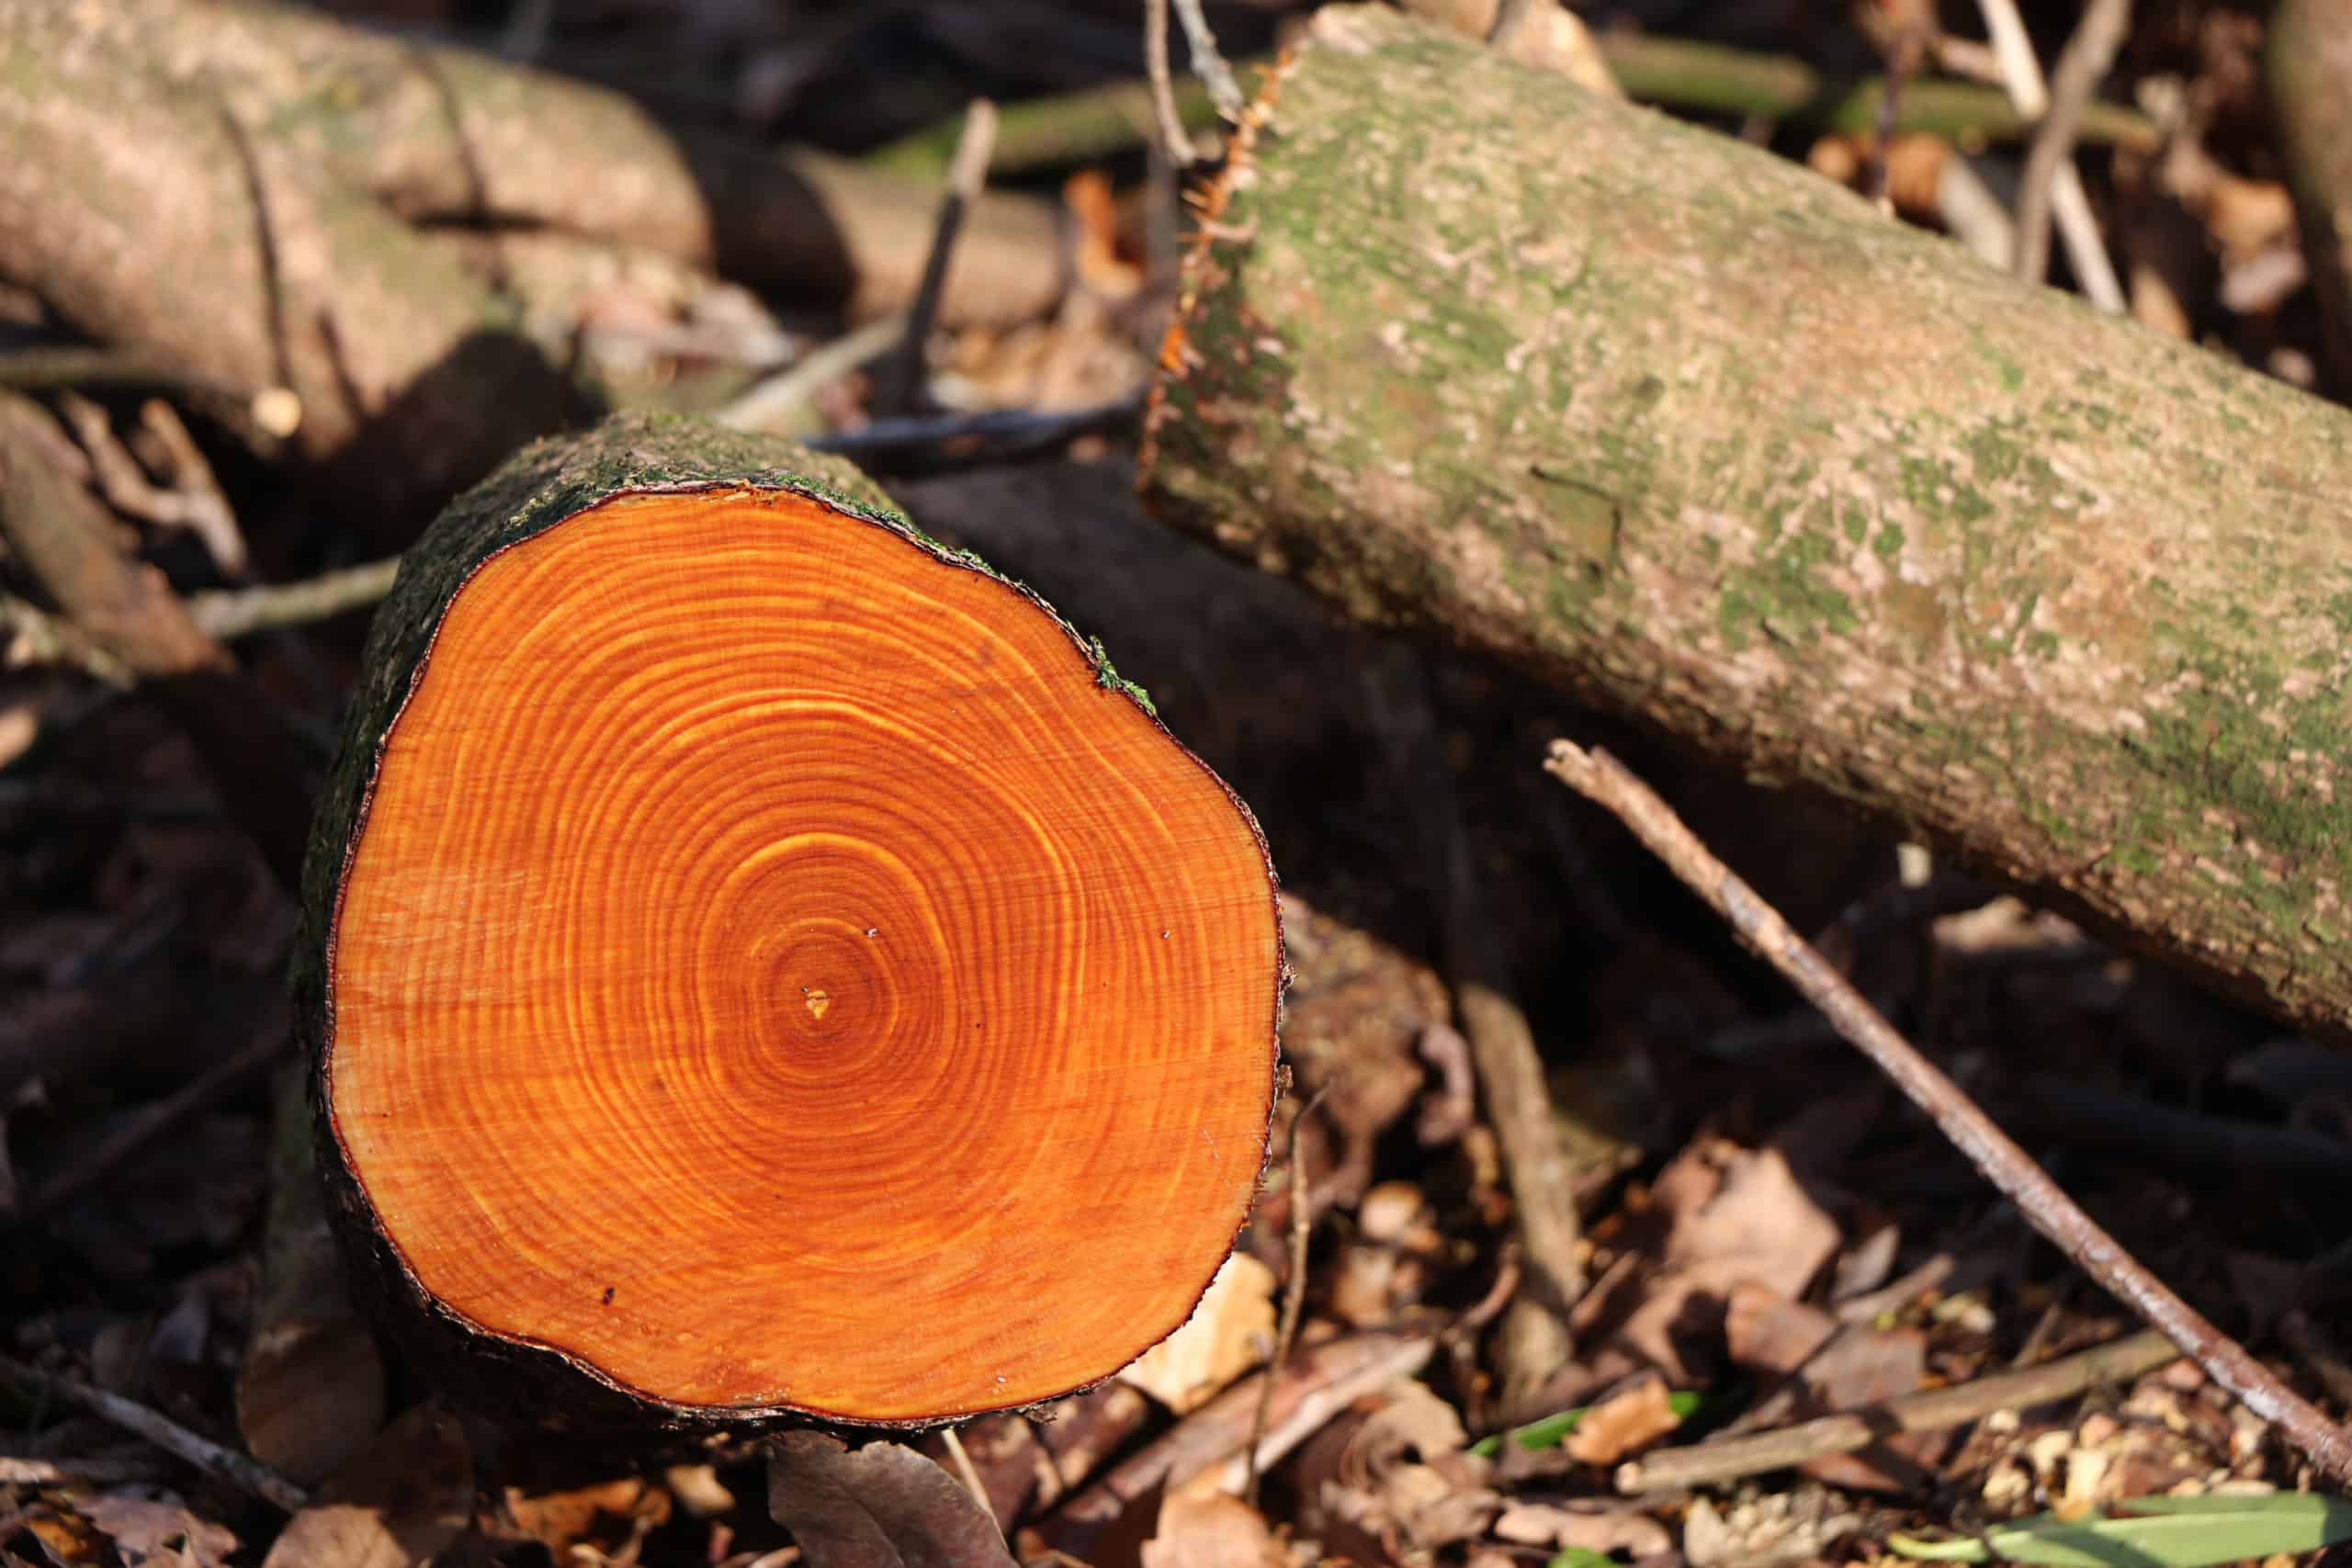 Tree rings, courtesy of Phil Connell / Flickr